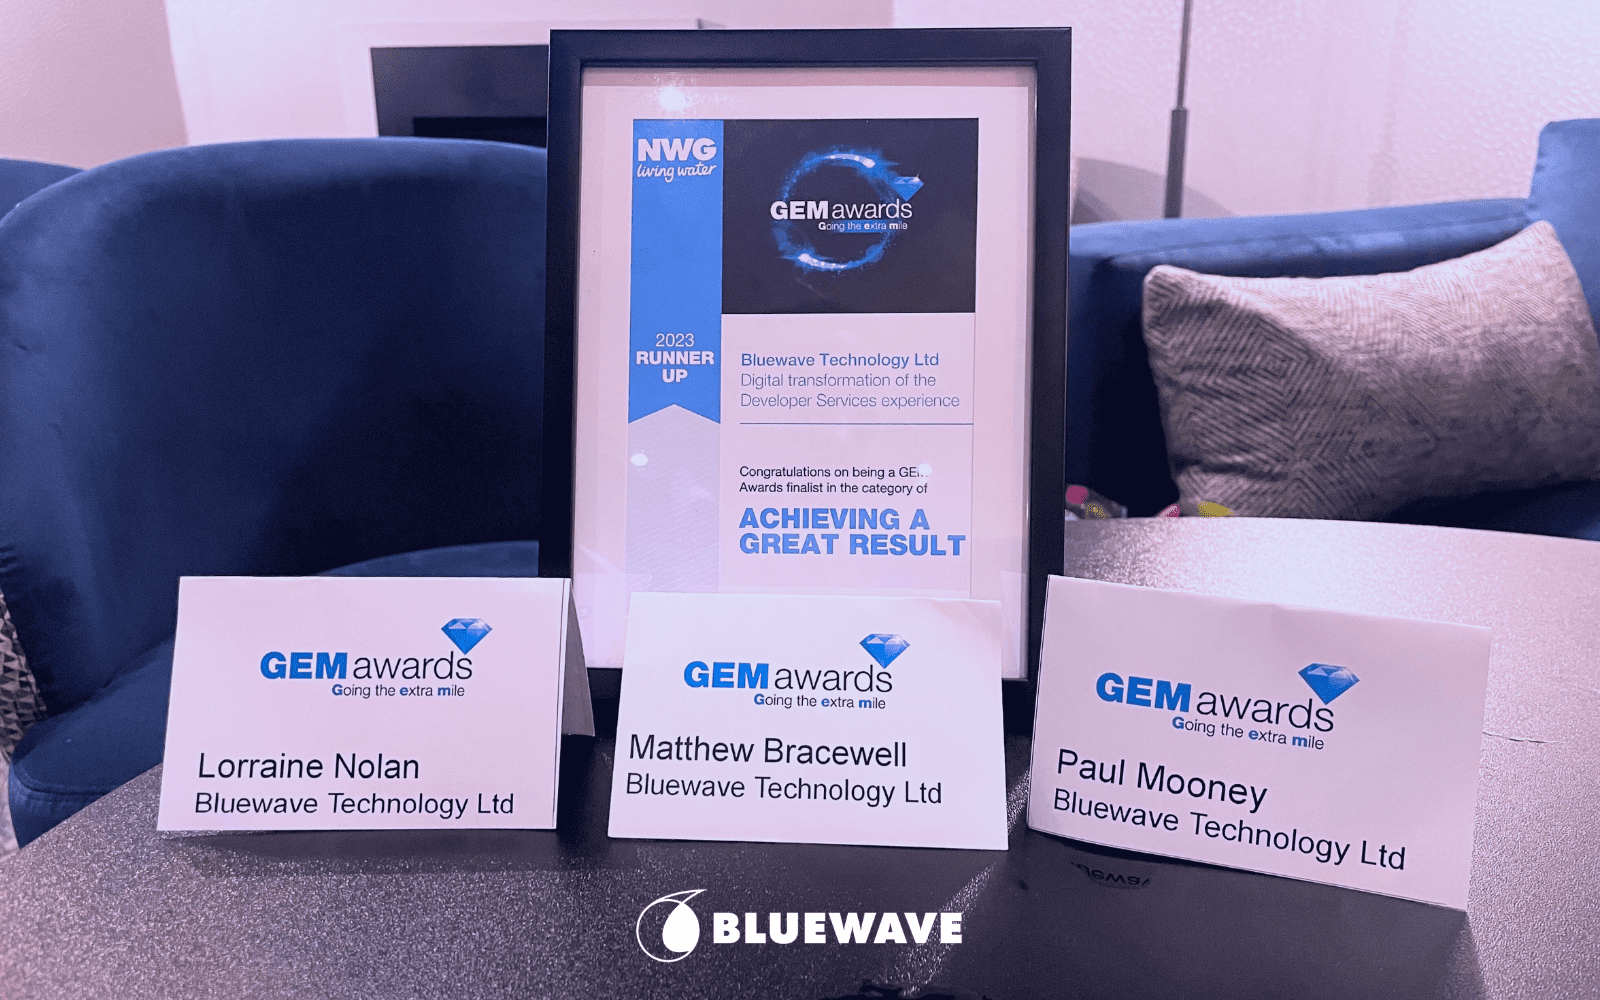 Bluewave Acknowledged for “Achieving a Great Result” at the GEM Awards 2023